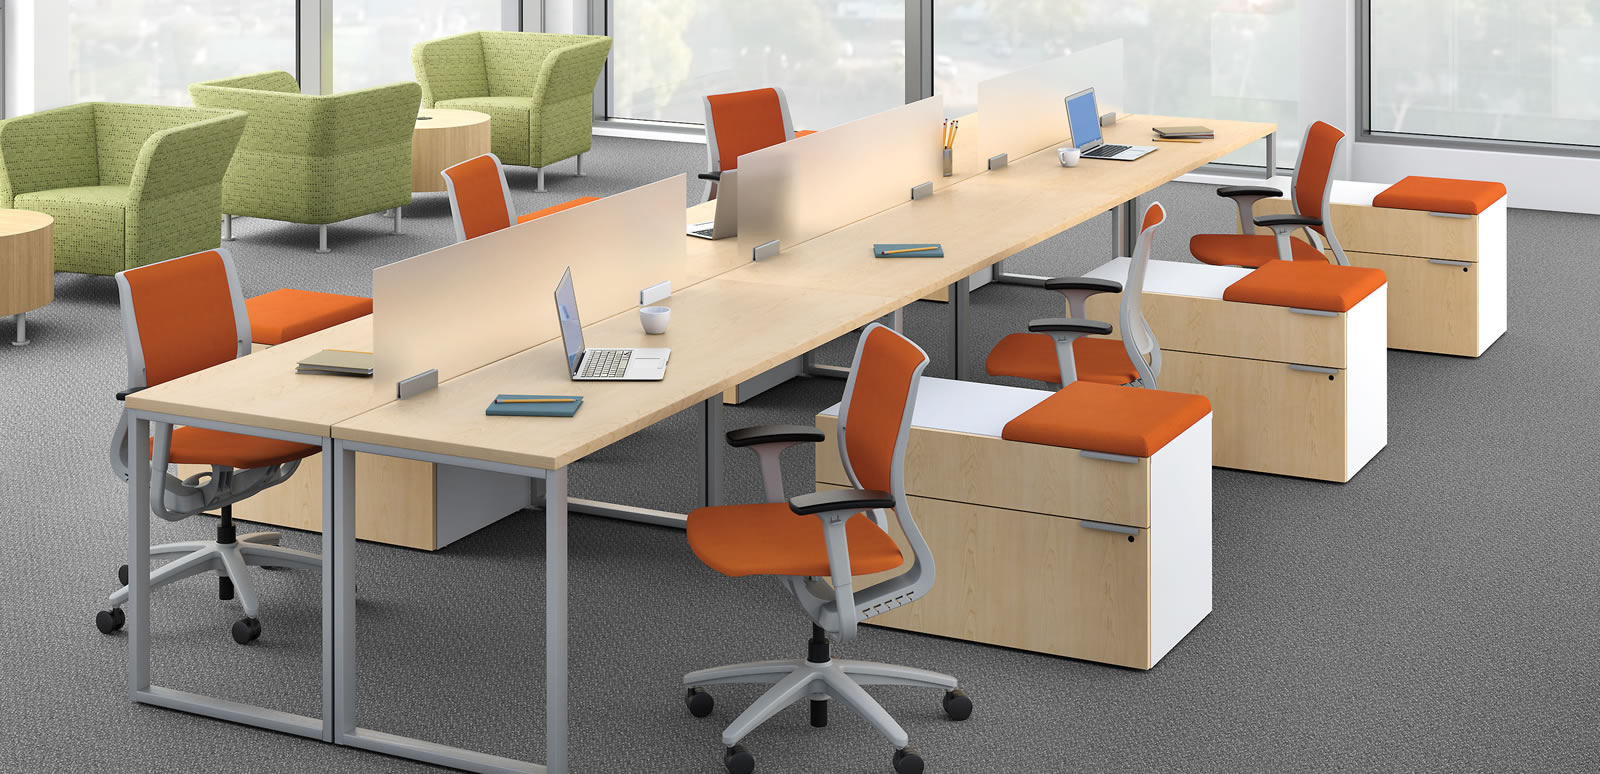 Important Facts About Office Furniture